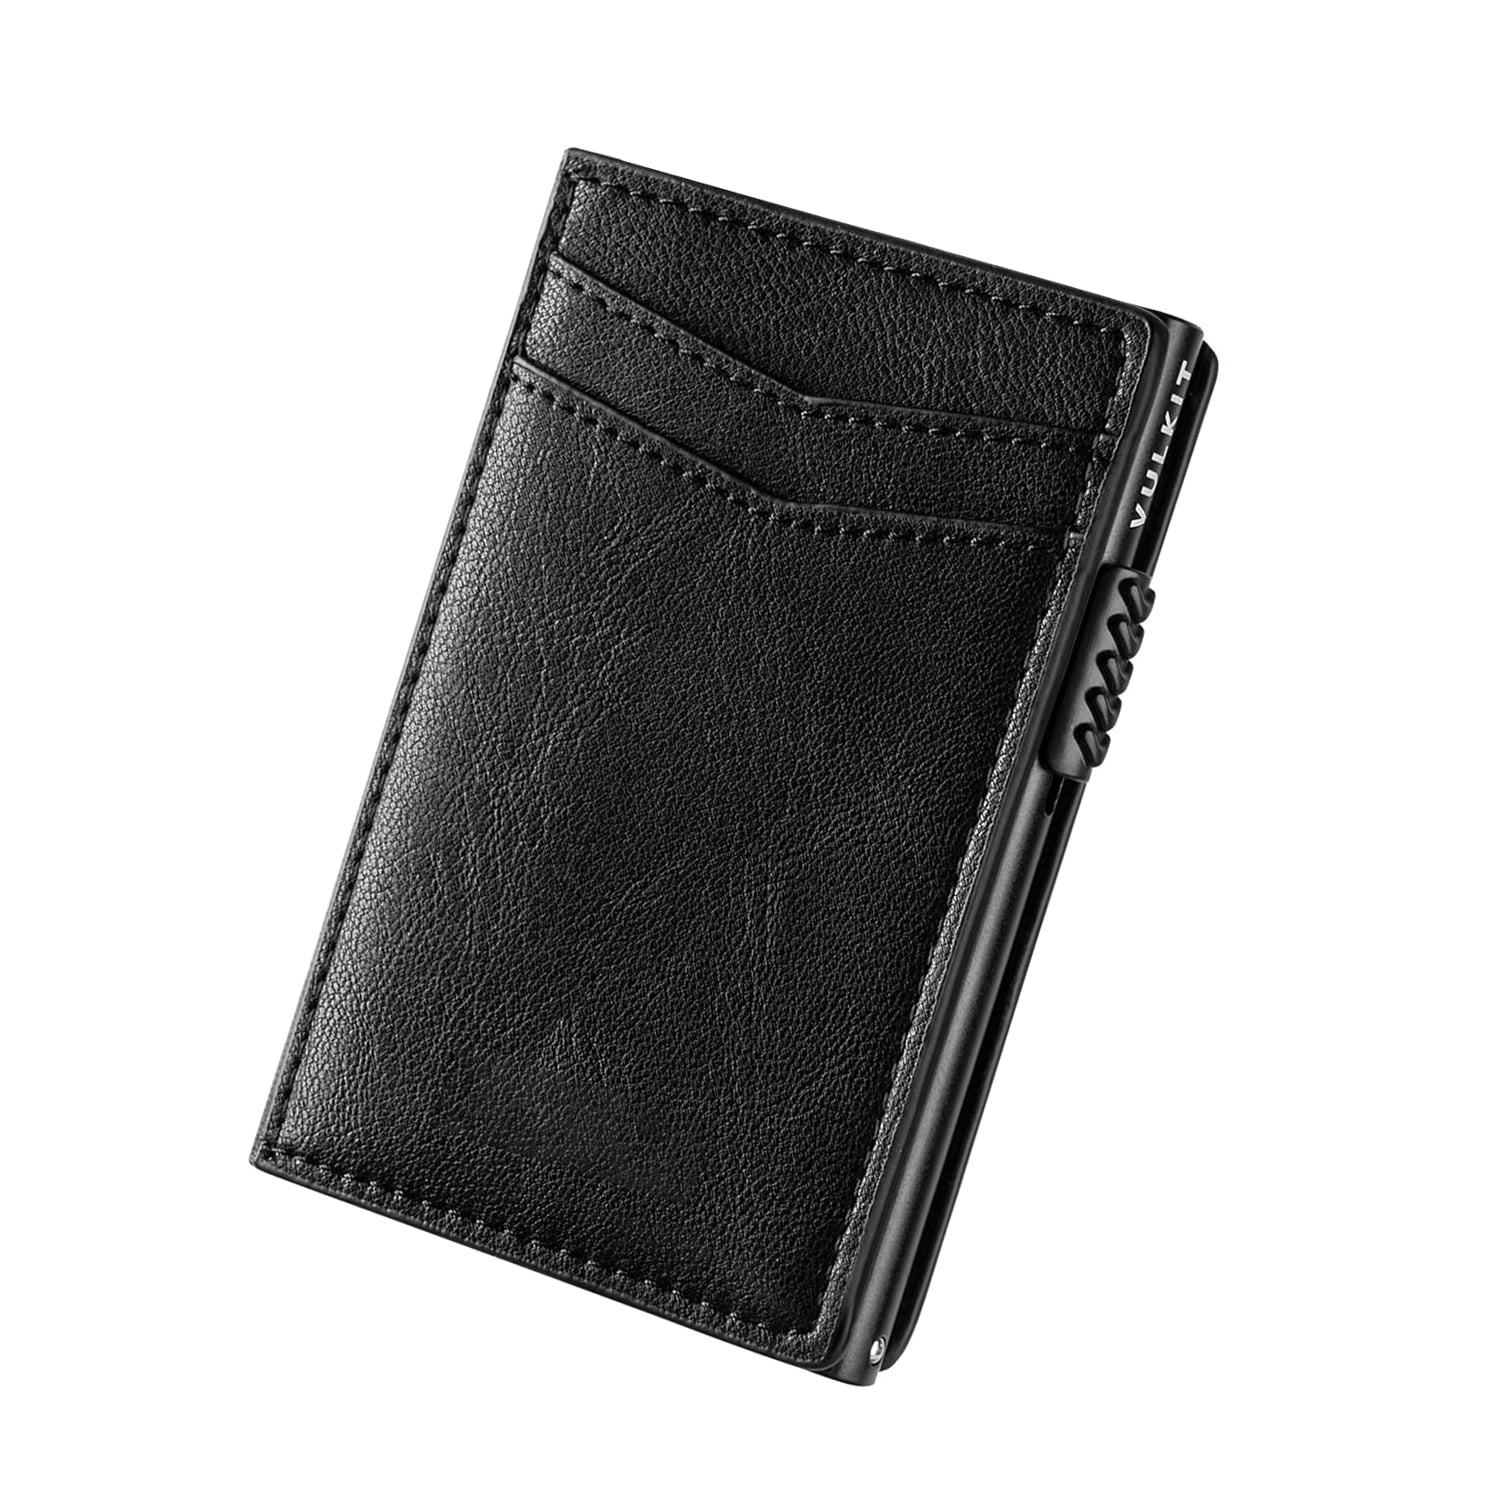 Casekey Anti-theft Men Wallet double Aluminum Leather Credit Card Holder  RFID Metal Wallet Automatic Pop Up Purse ID Cardholder